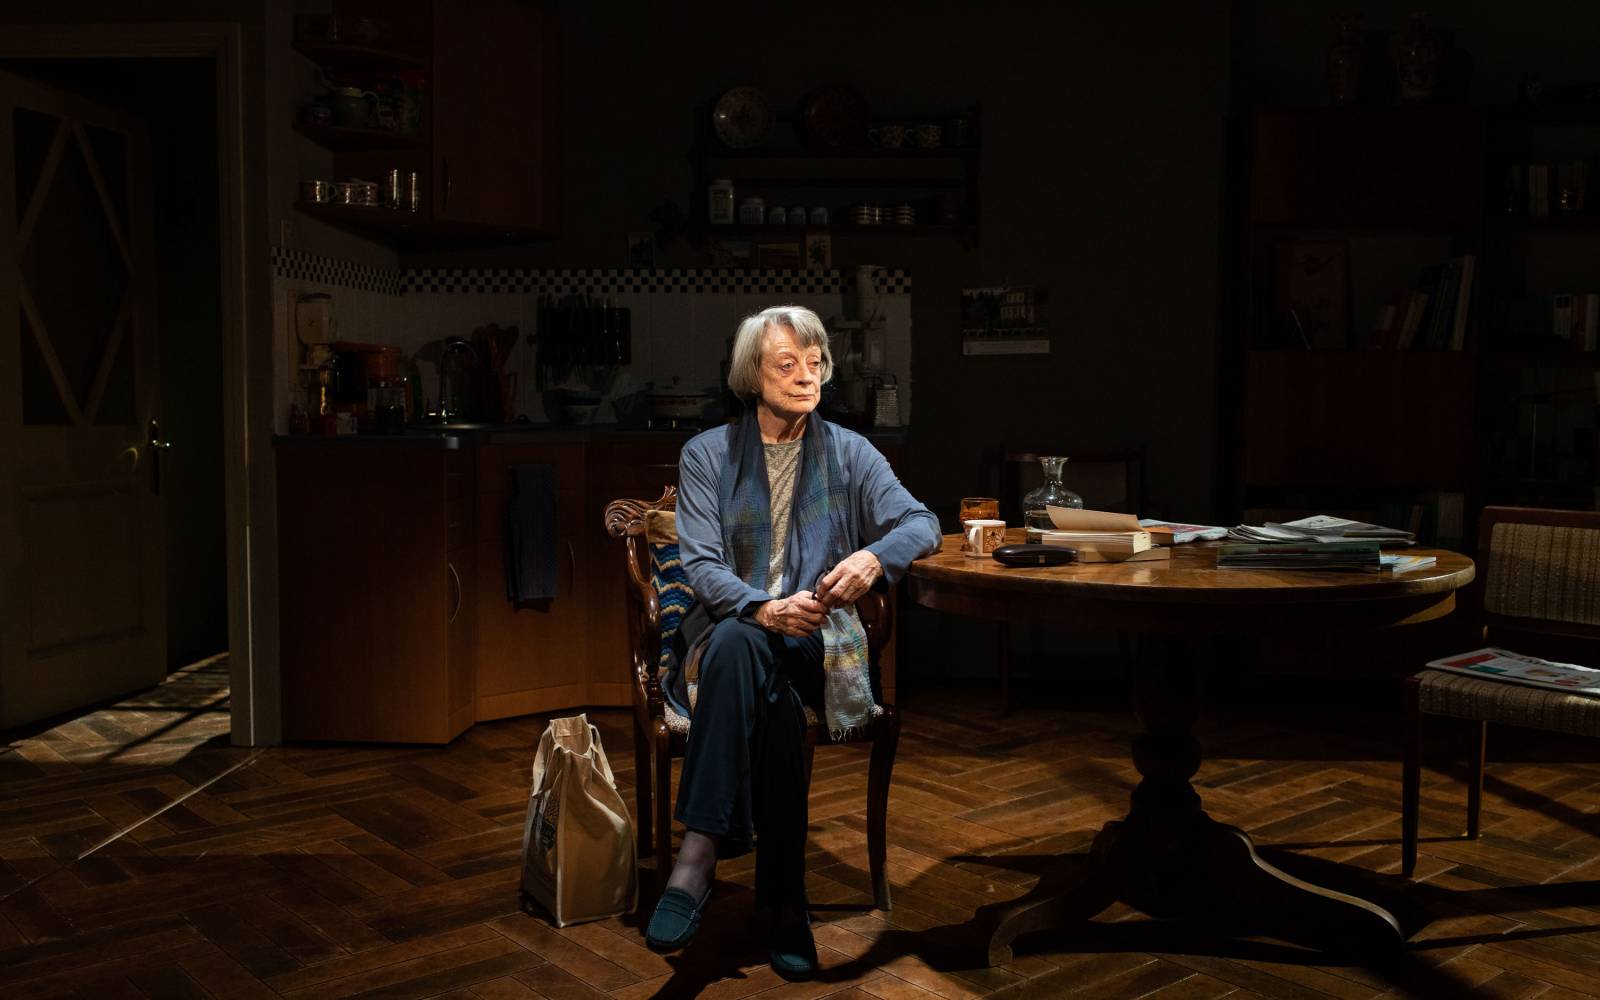 An older woman sits alone in a darkened kitchen, her elbow leaning against a table